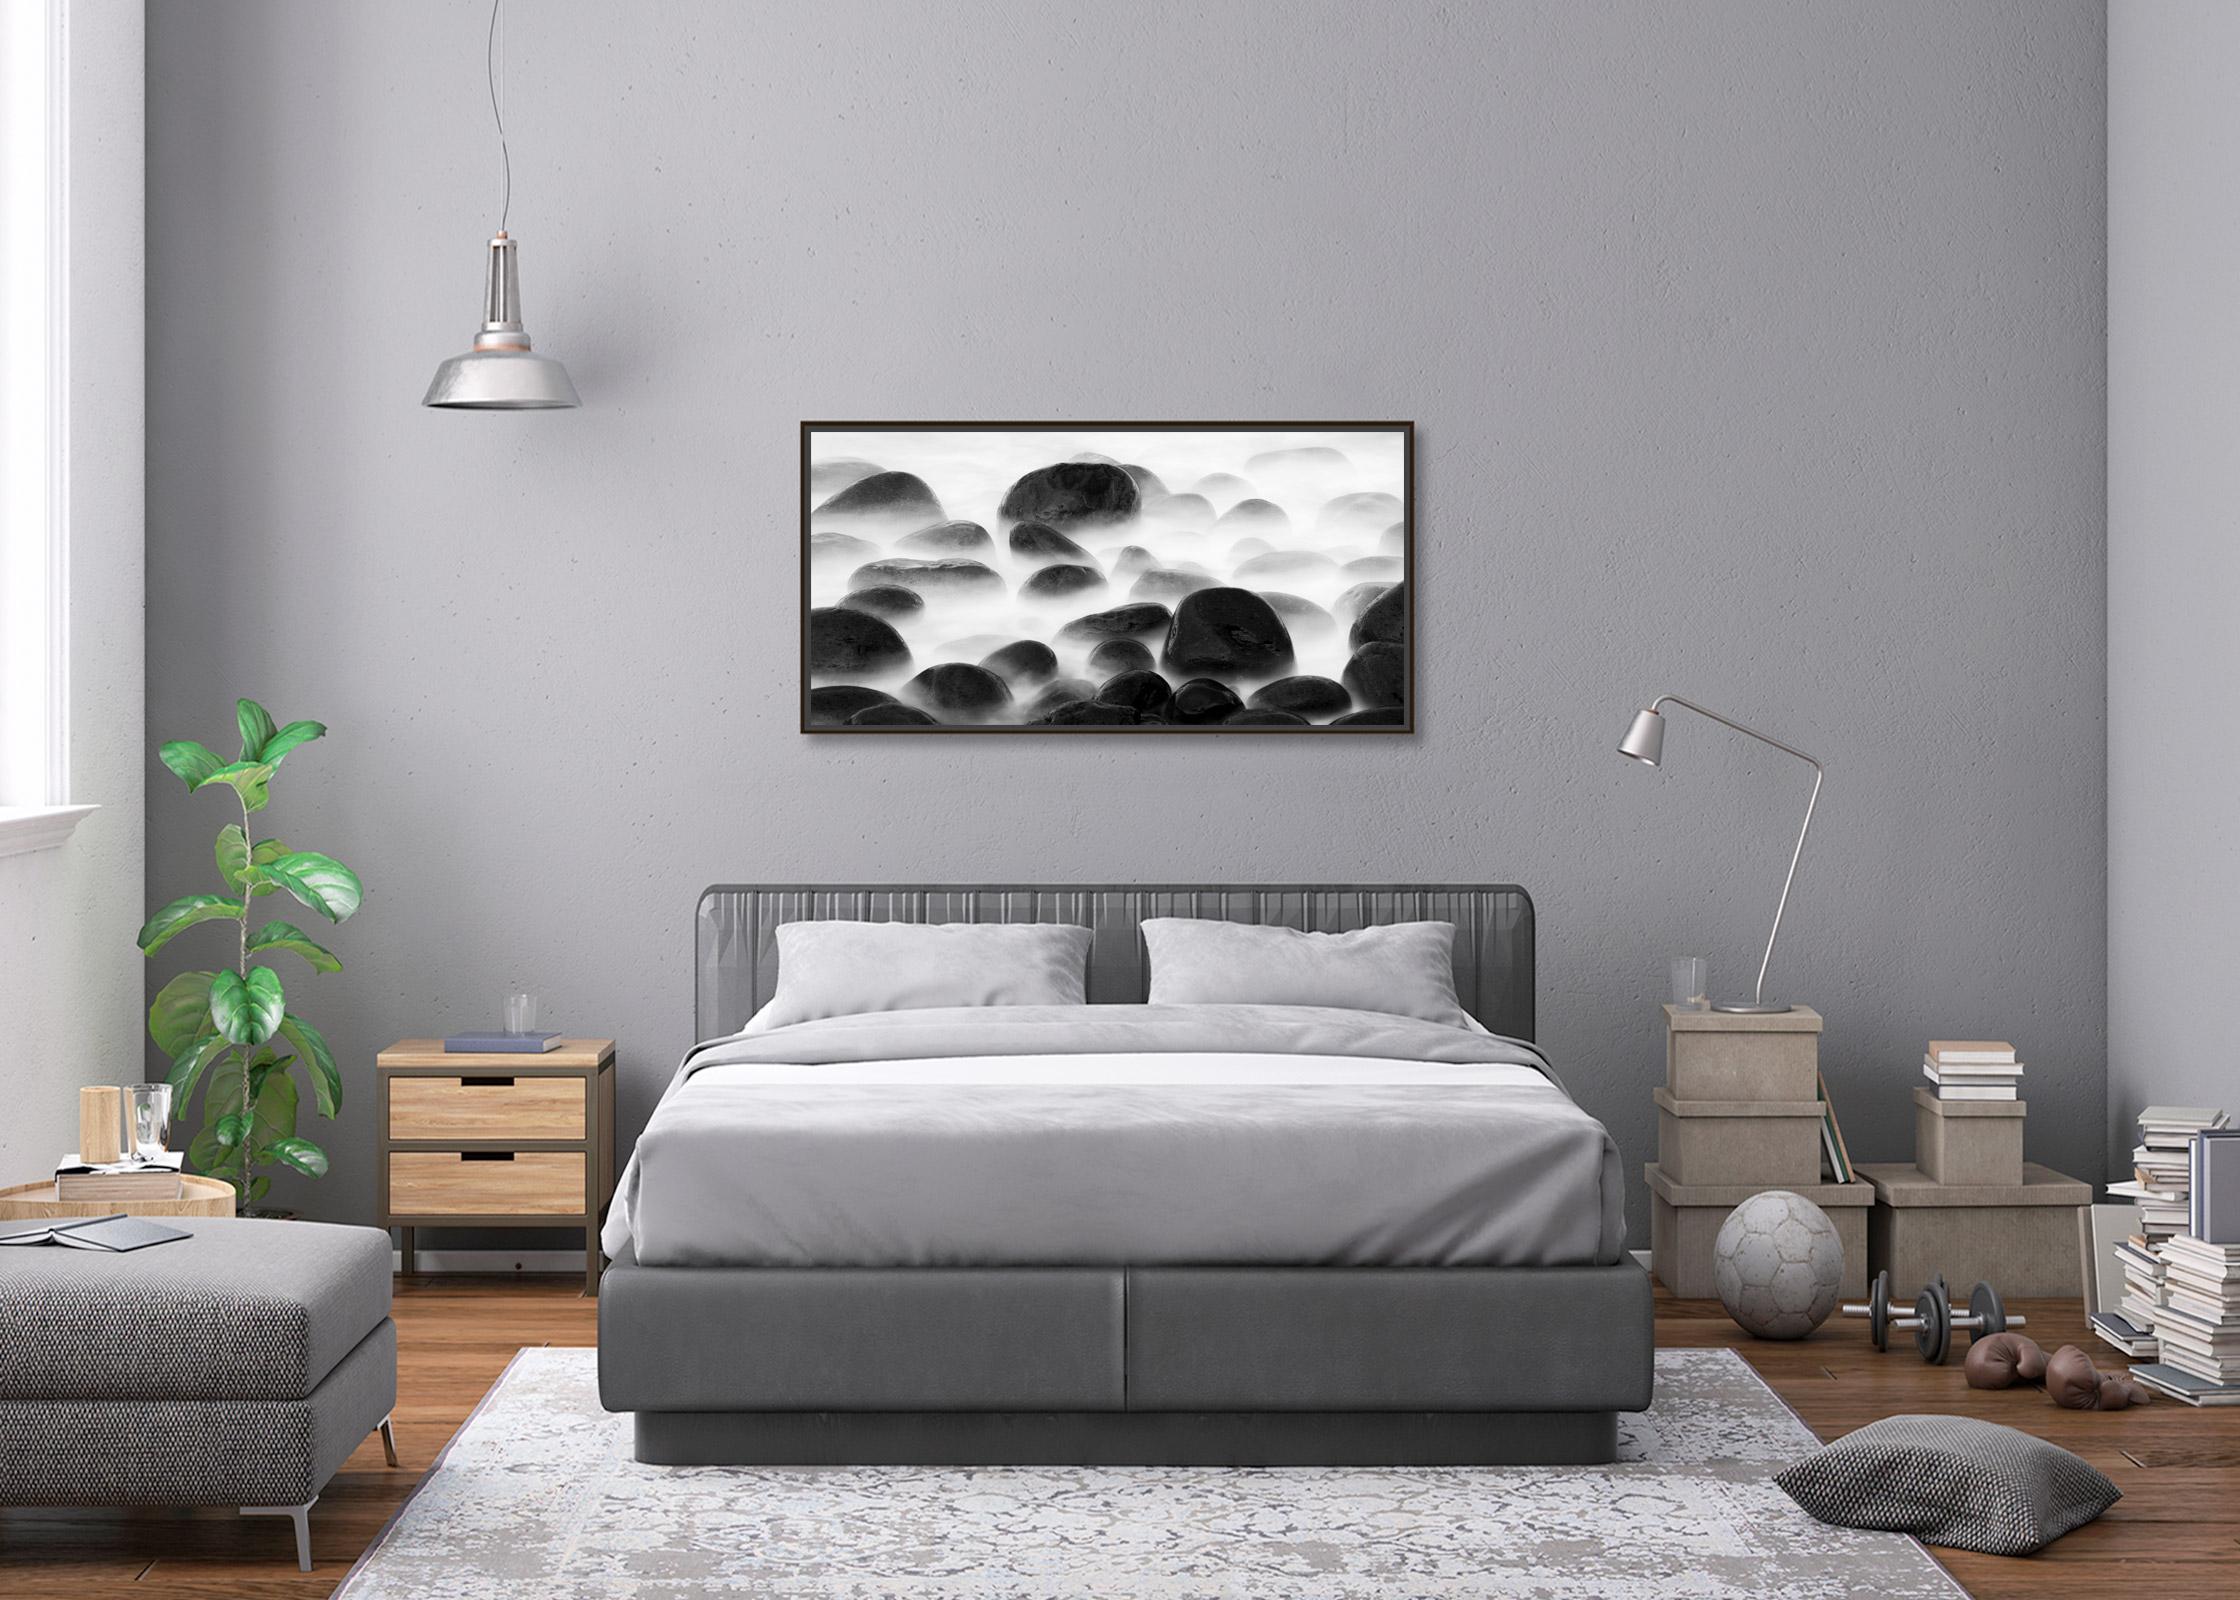 Black and White Fine Art Landscape photography. Big black stones on the shore in madeira, Portugal. Archival pigment ink print, edition of 9. Signed, titled, dated and numbered by artist. Certificate of authenticity included. Printed with 4cm white